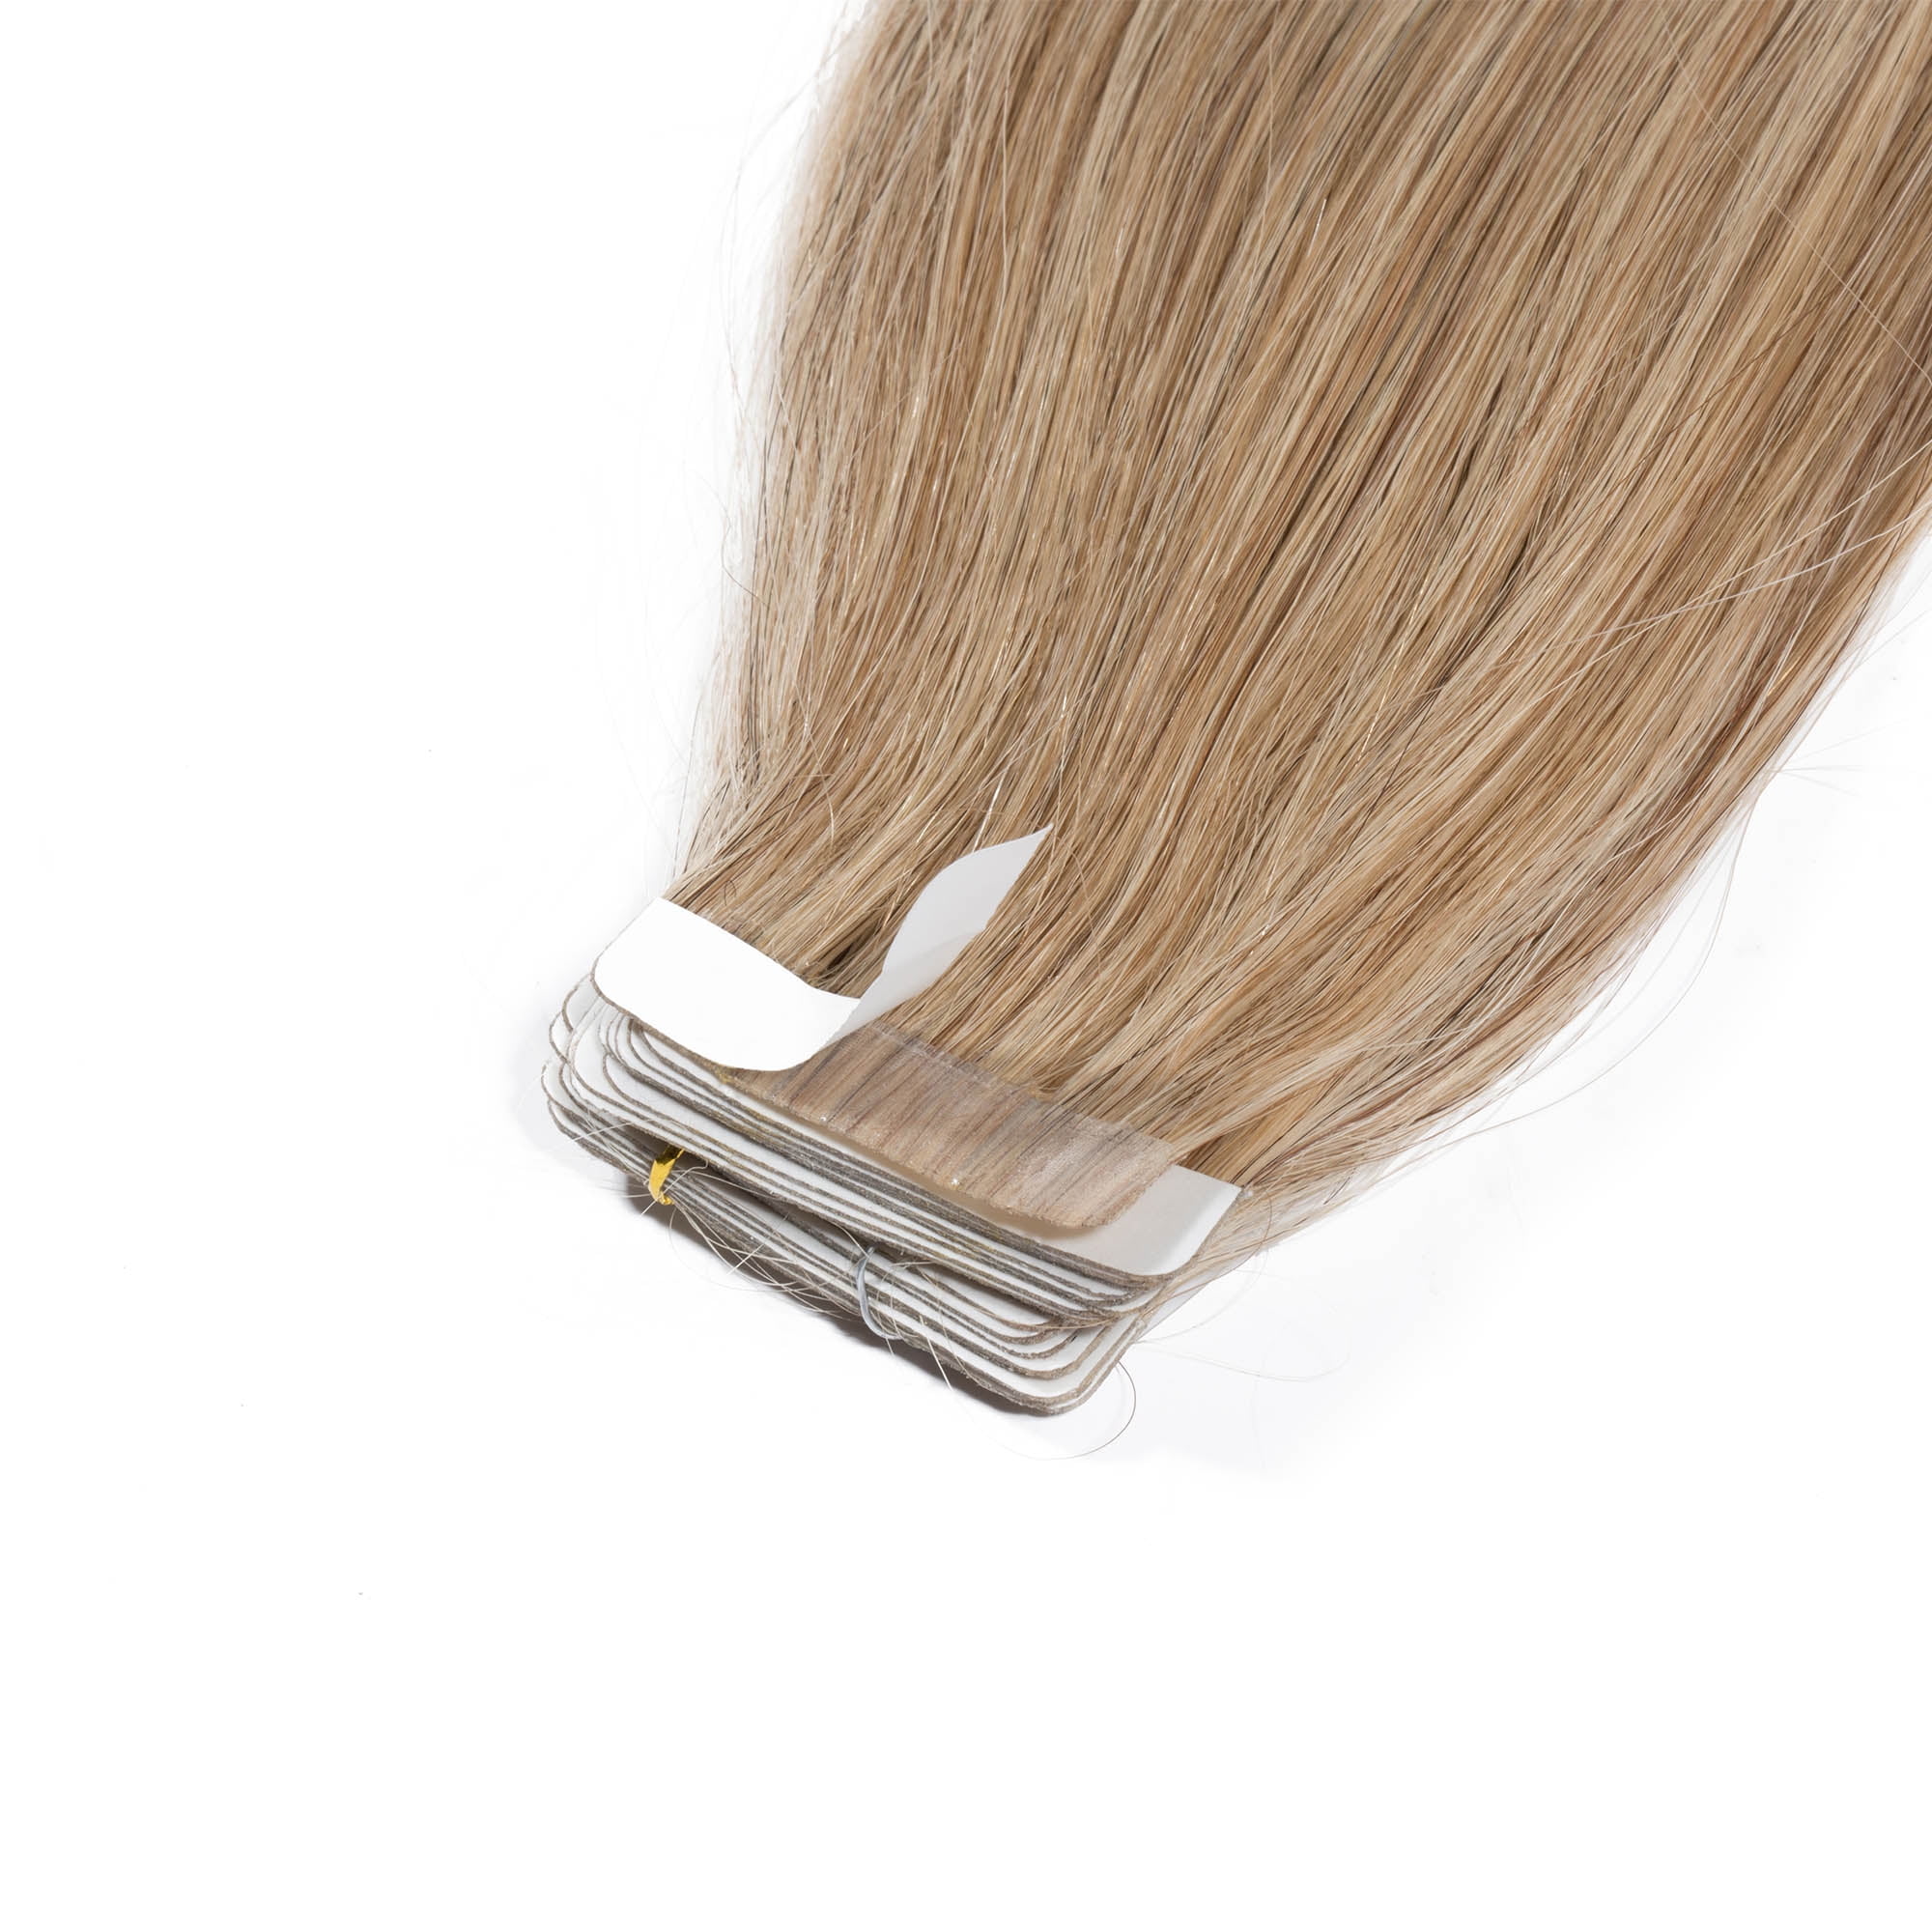 Set Back Of Full Head Brazilian Human Hair Extension Clips 16 32 Inches  Synthetic From Xxpfyf123, $6.11